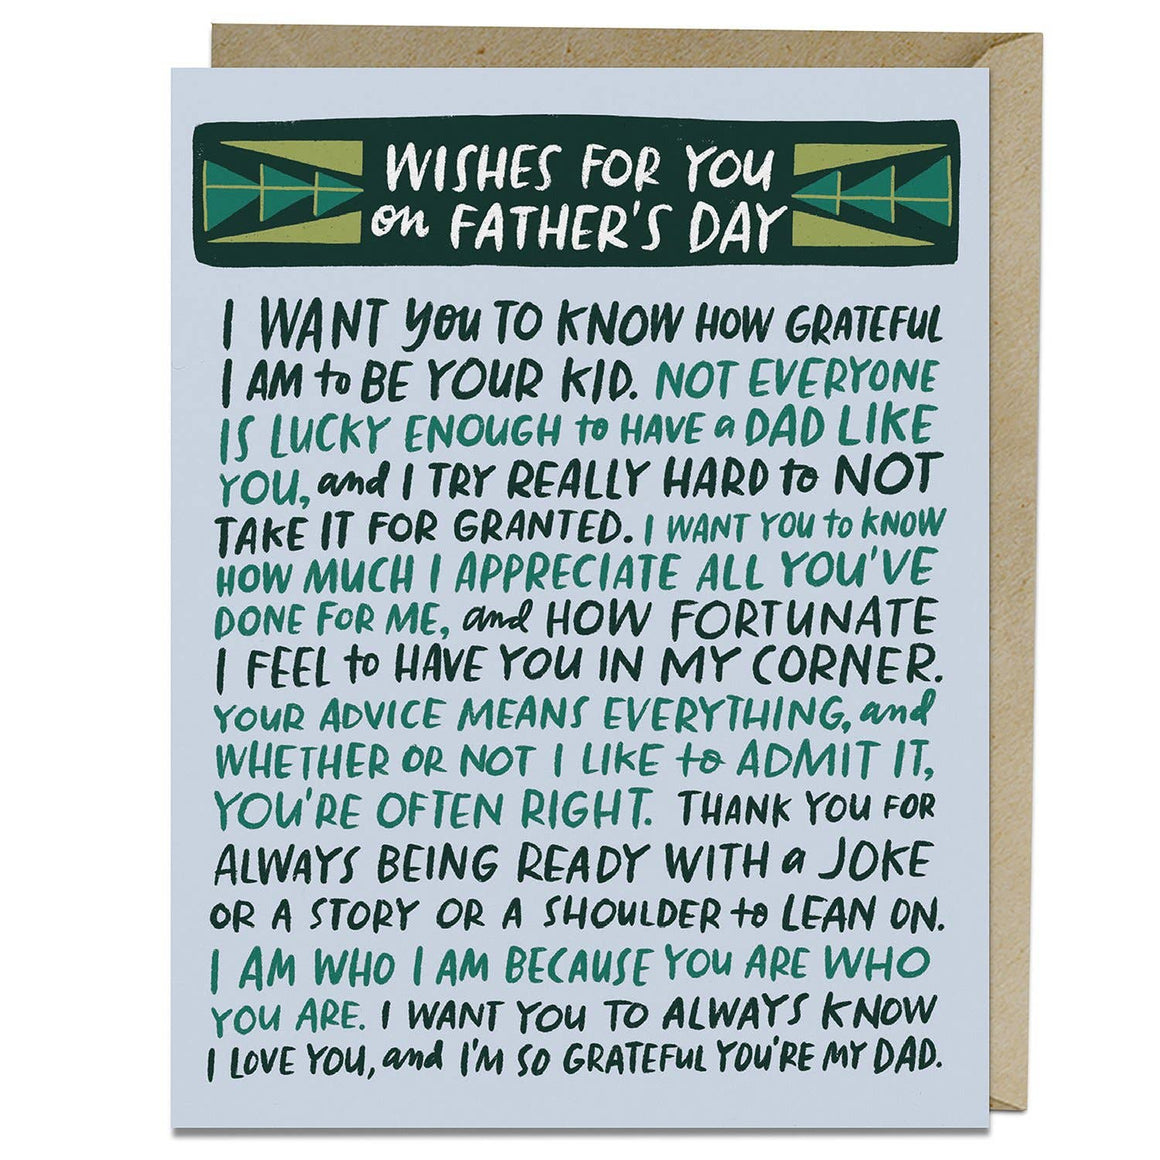 Wishes For You - Fathers Day Card